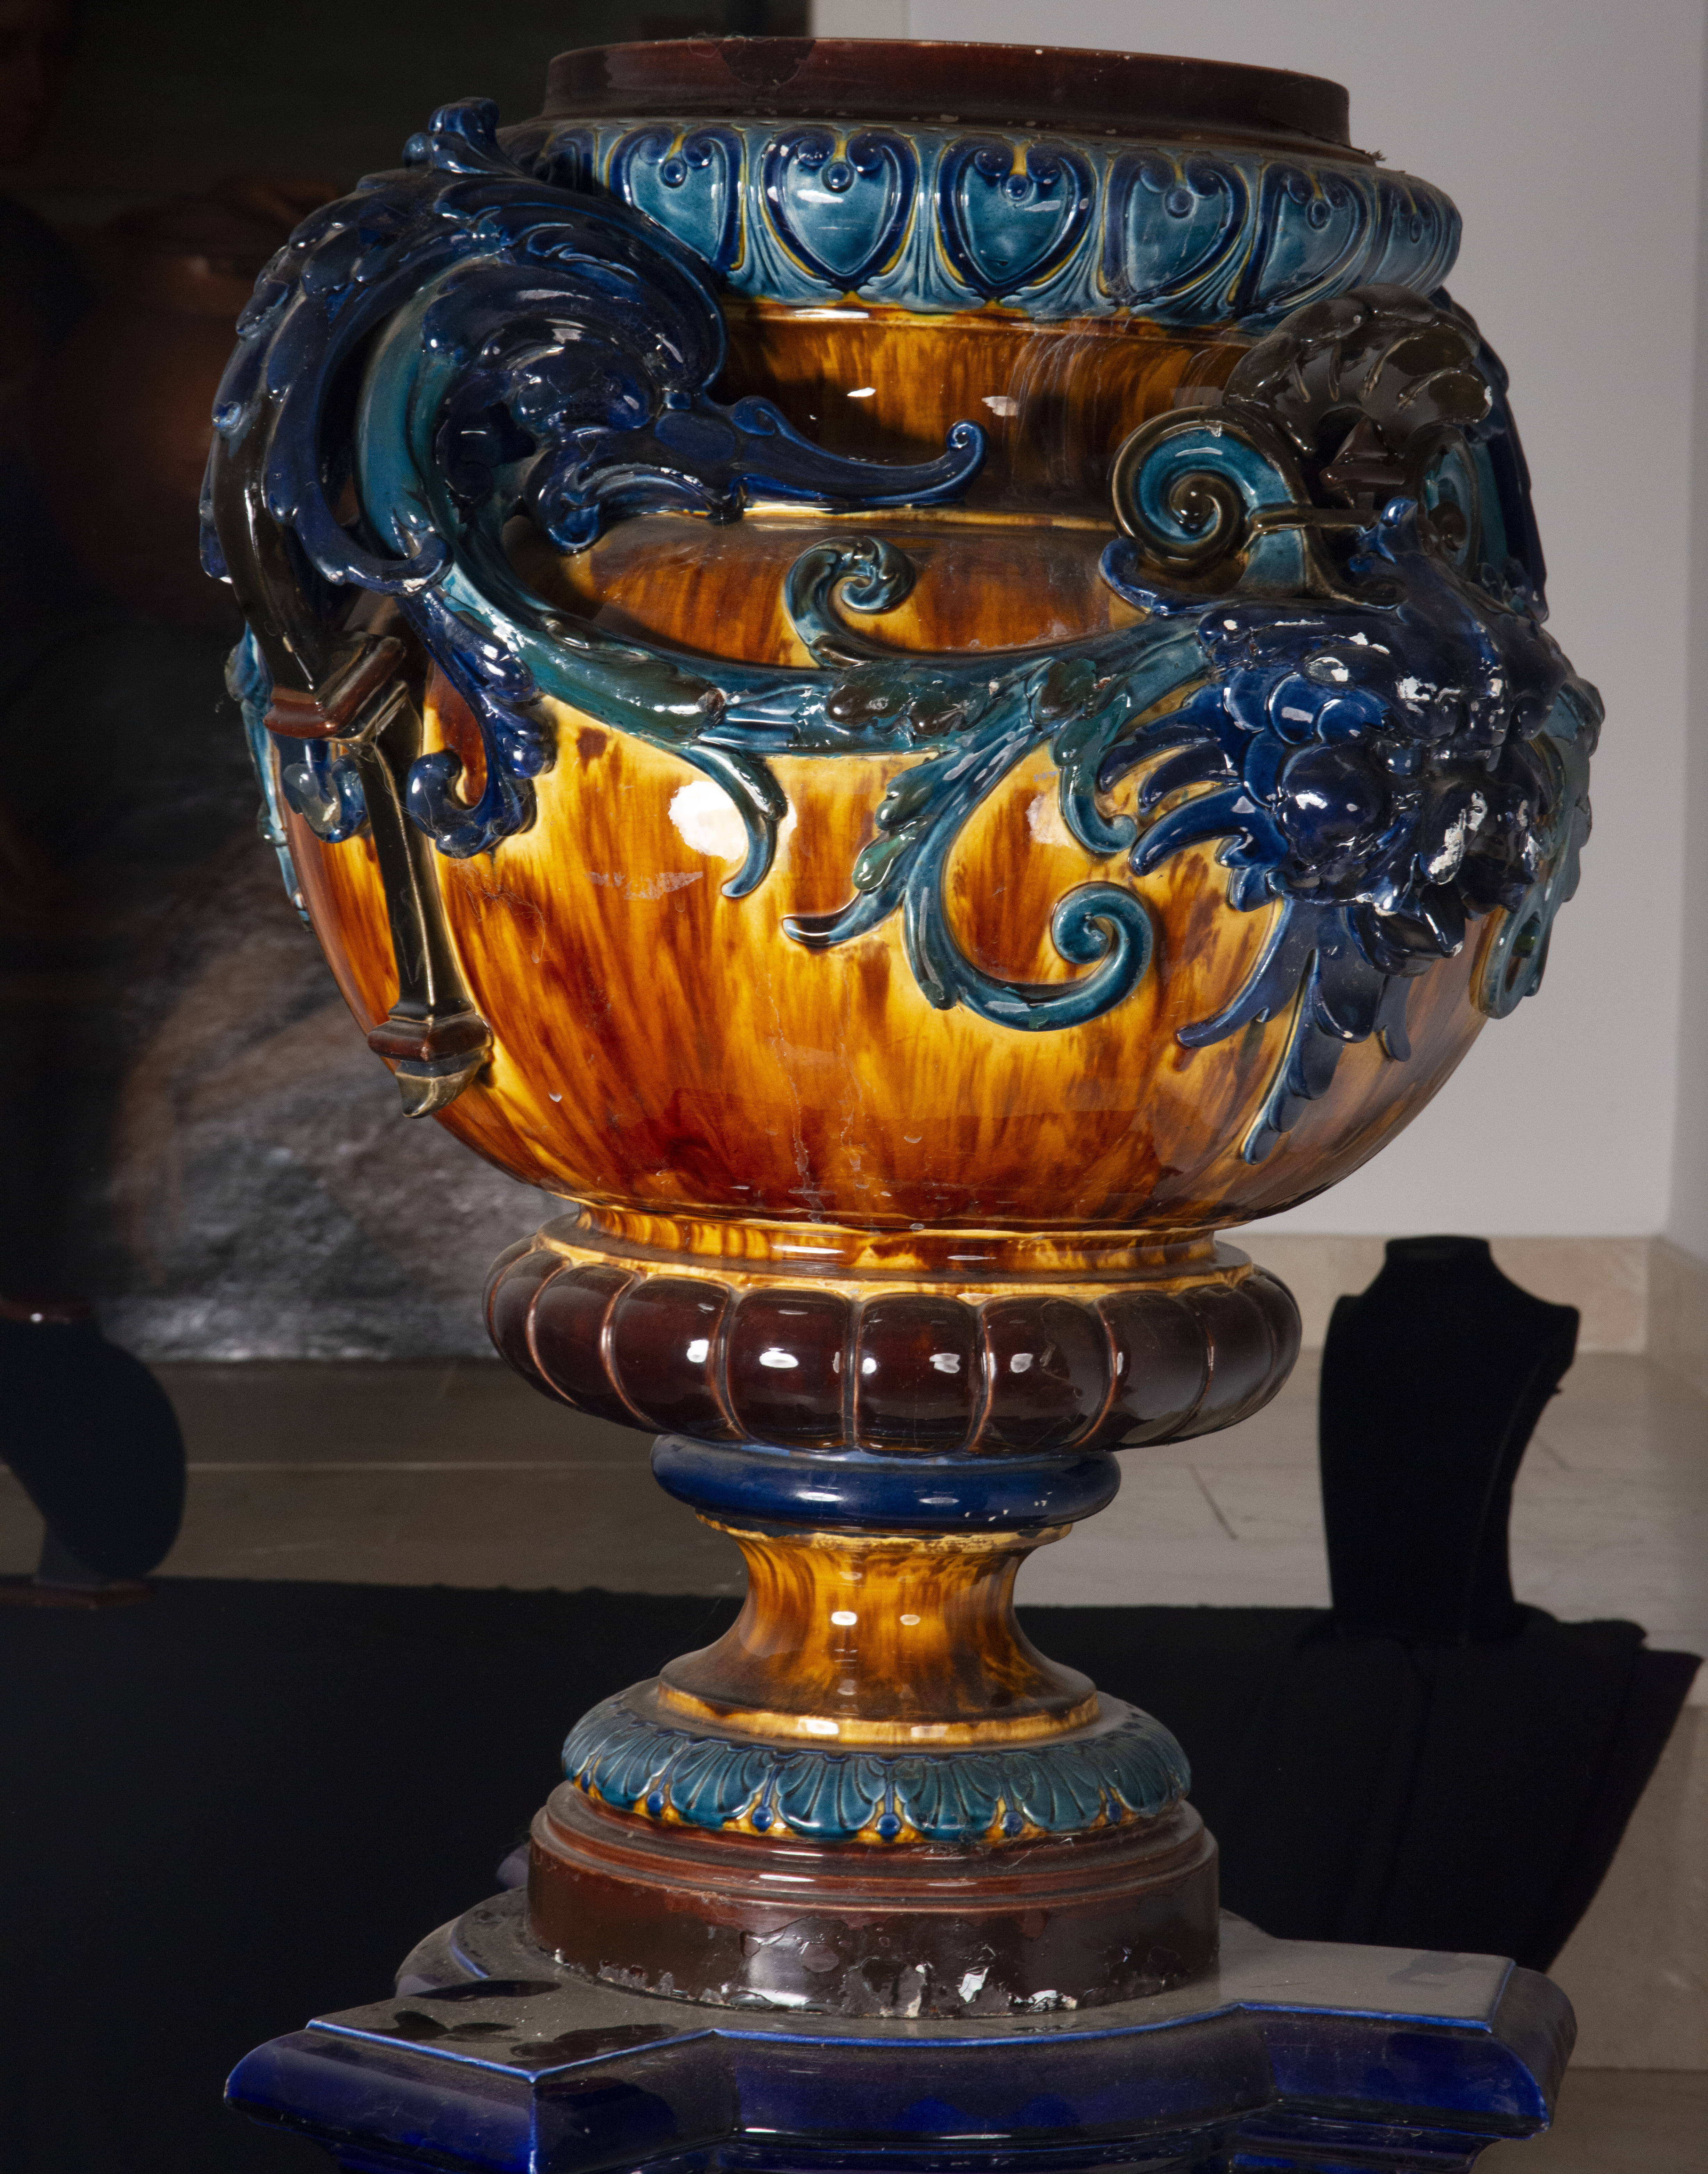 Large French Planter in cobalt blue glazed and polychrome stoneware in the Art Nouveau style, around - Image 3 of 6